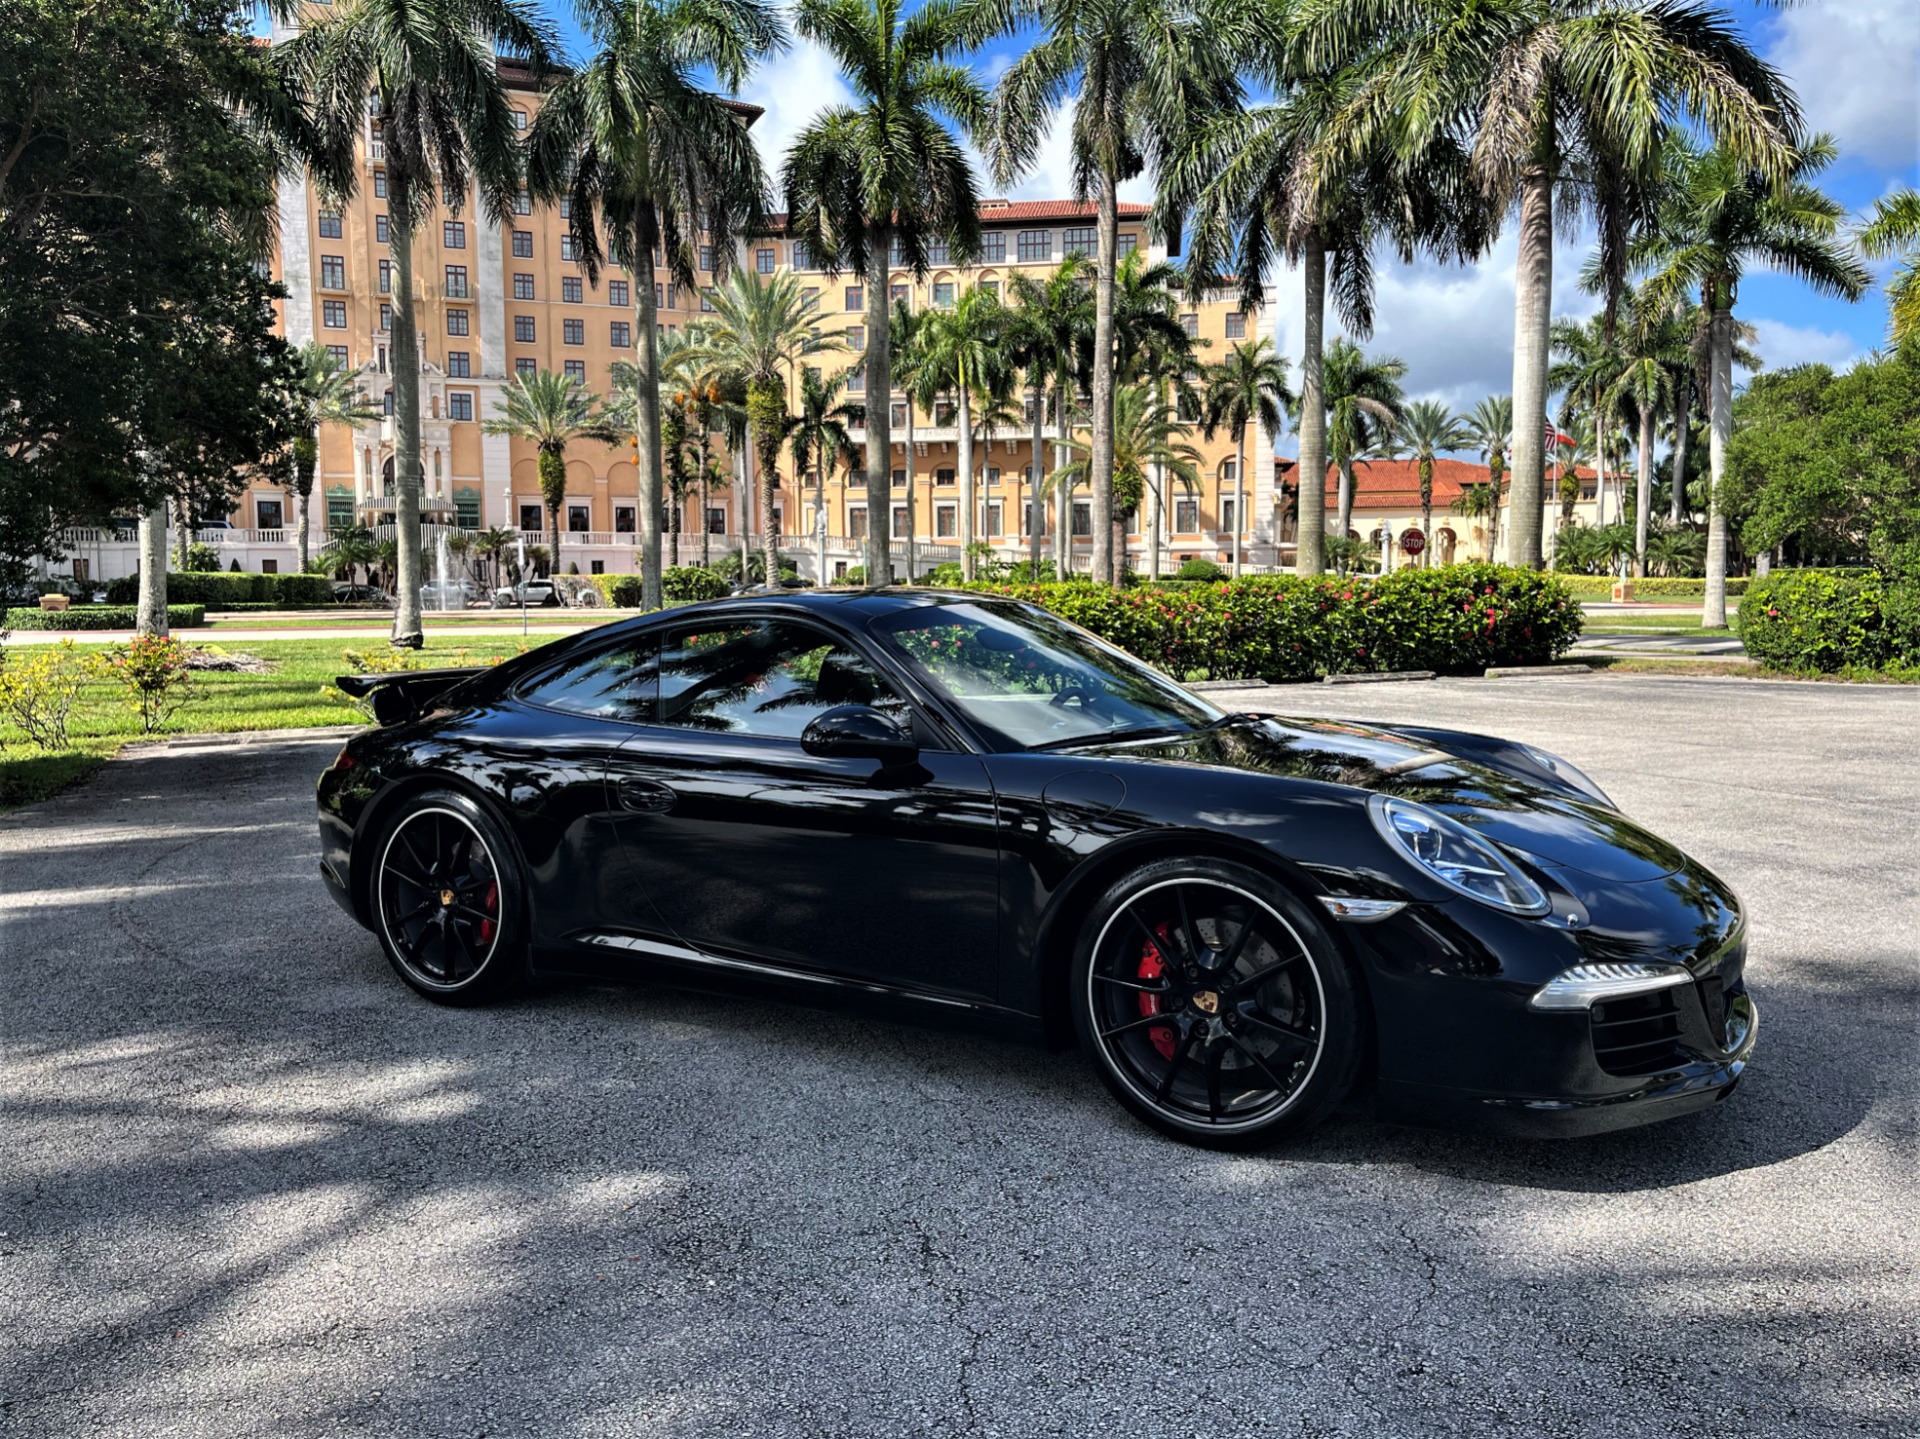 Used 2013 Porsche 911 Carrera S For Sale ($73,850) | The Gables Sports Cars  Stock #123289